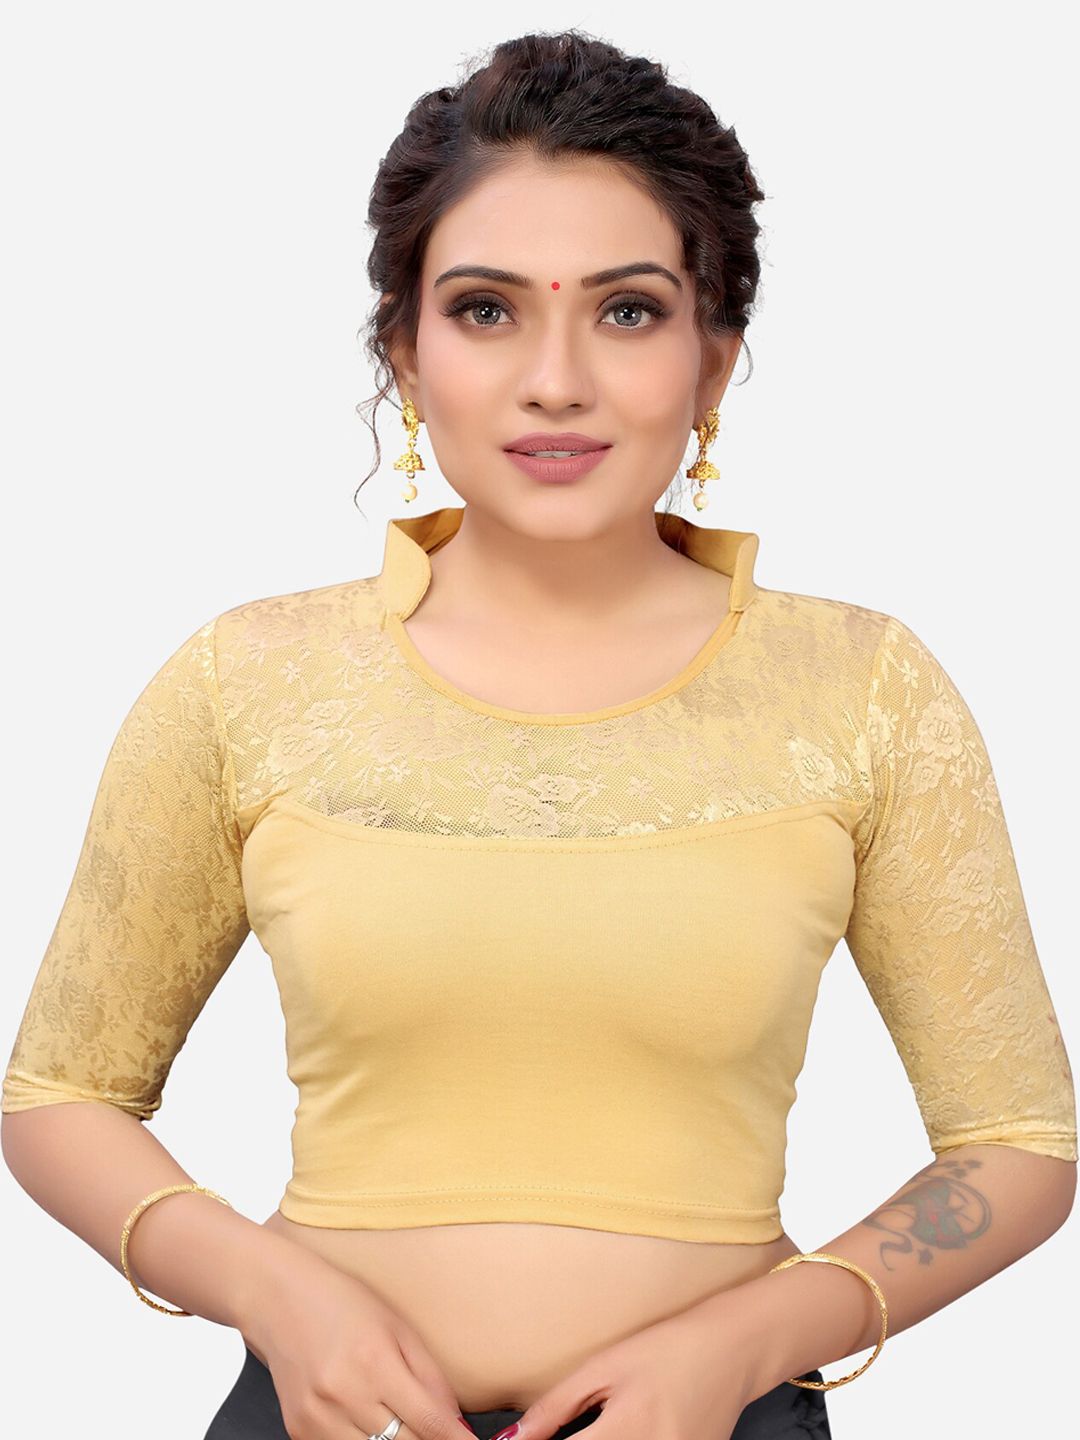 SIRIL Women Beige-Colored Lycra Woven Design Saree Blouse Price in India